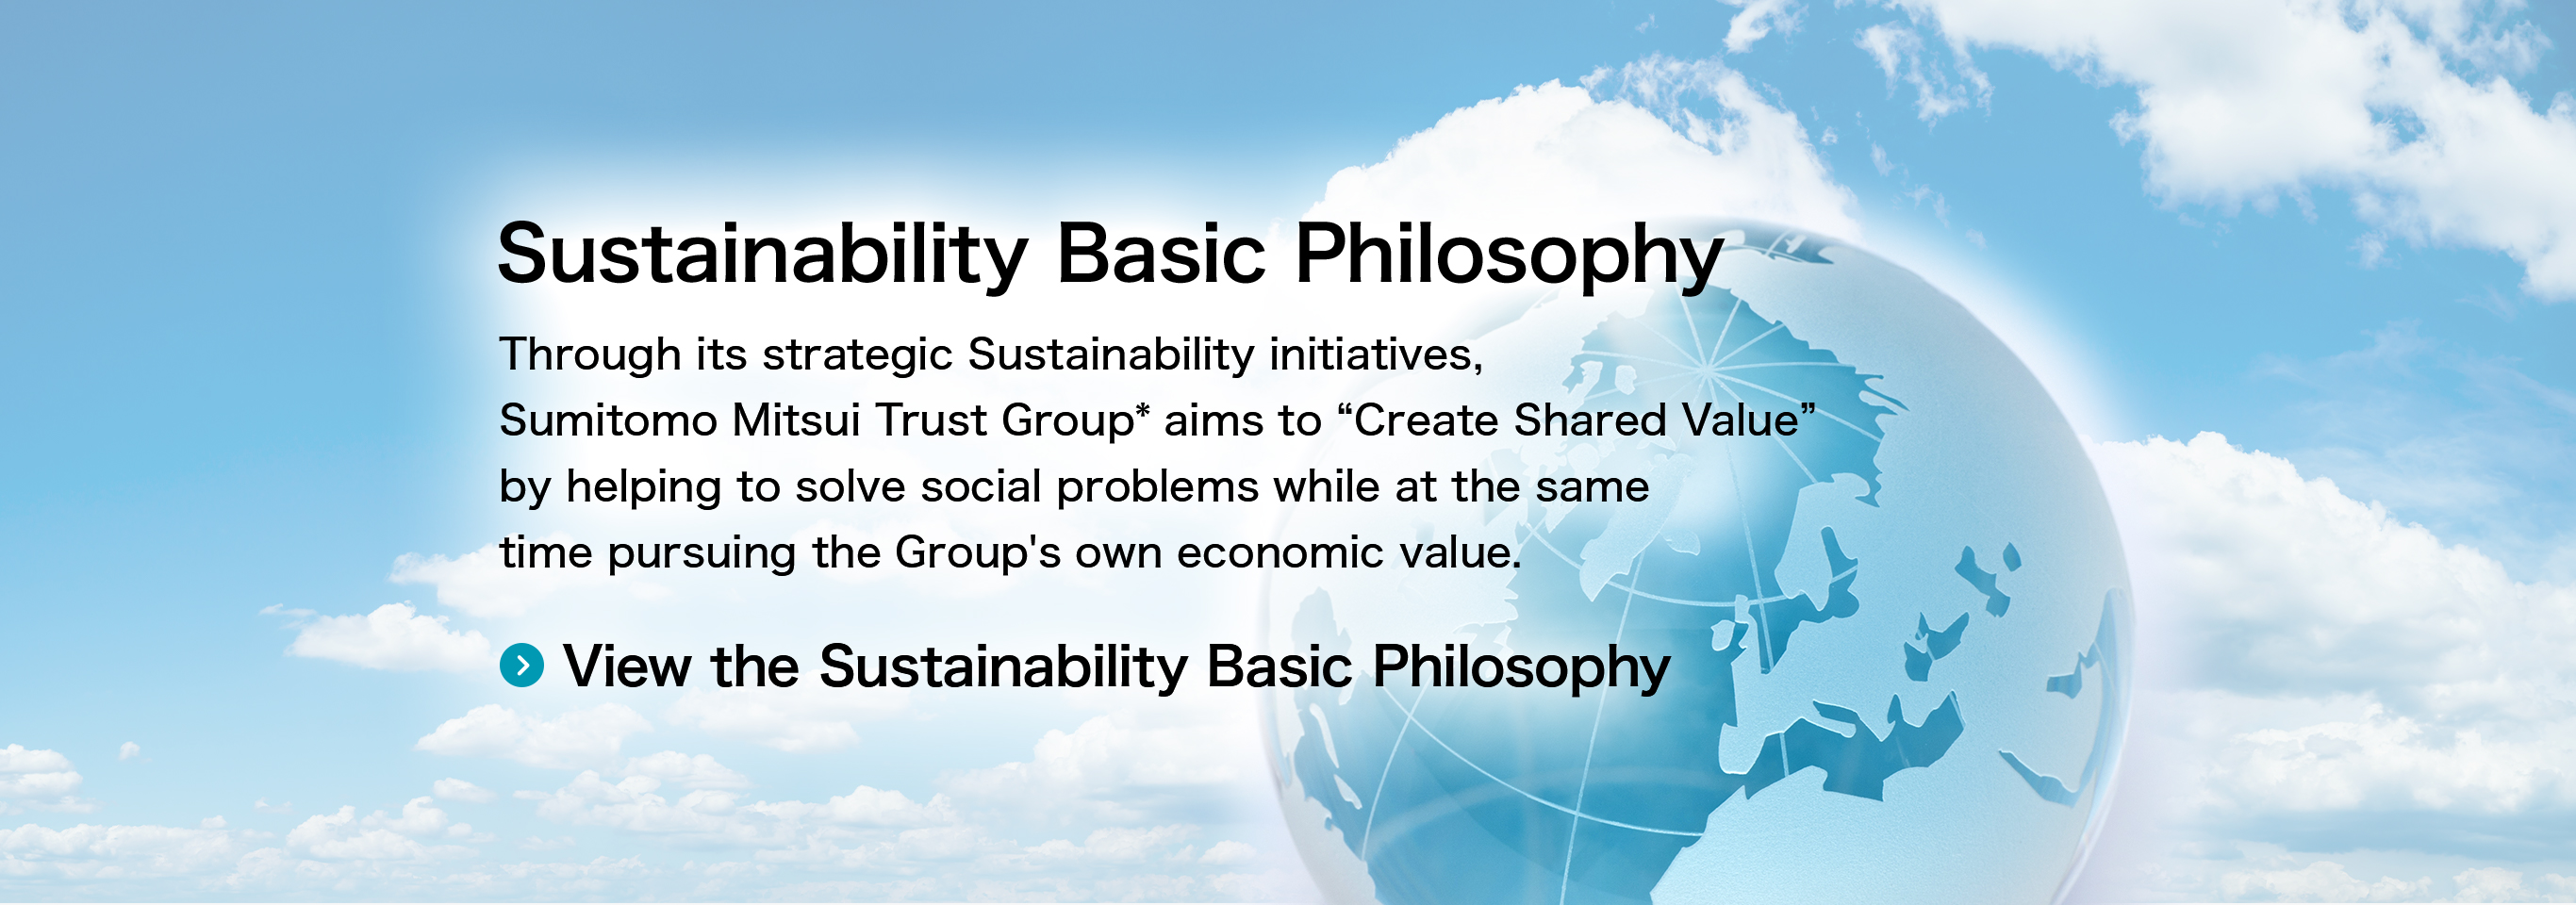 Sustainability Basic Philosophy Through its strategic Sustainability initiatives, Sumitomo Mitsui Trust Group* aims to “Create Shared Value” by helping to solve social problems while at the same time pursuing the Group's own economic value. View the Sustainability Basic Philosophy